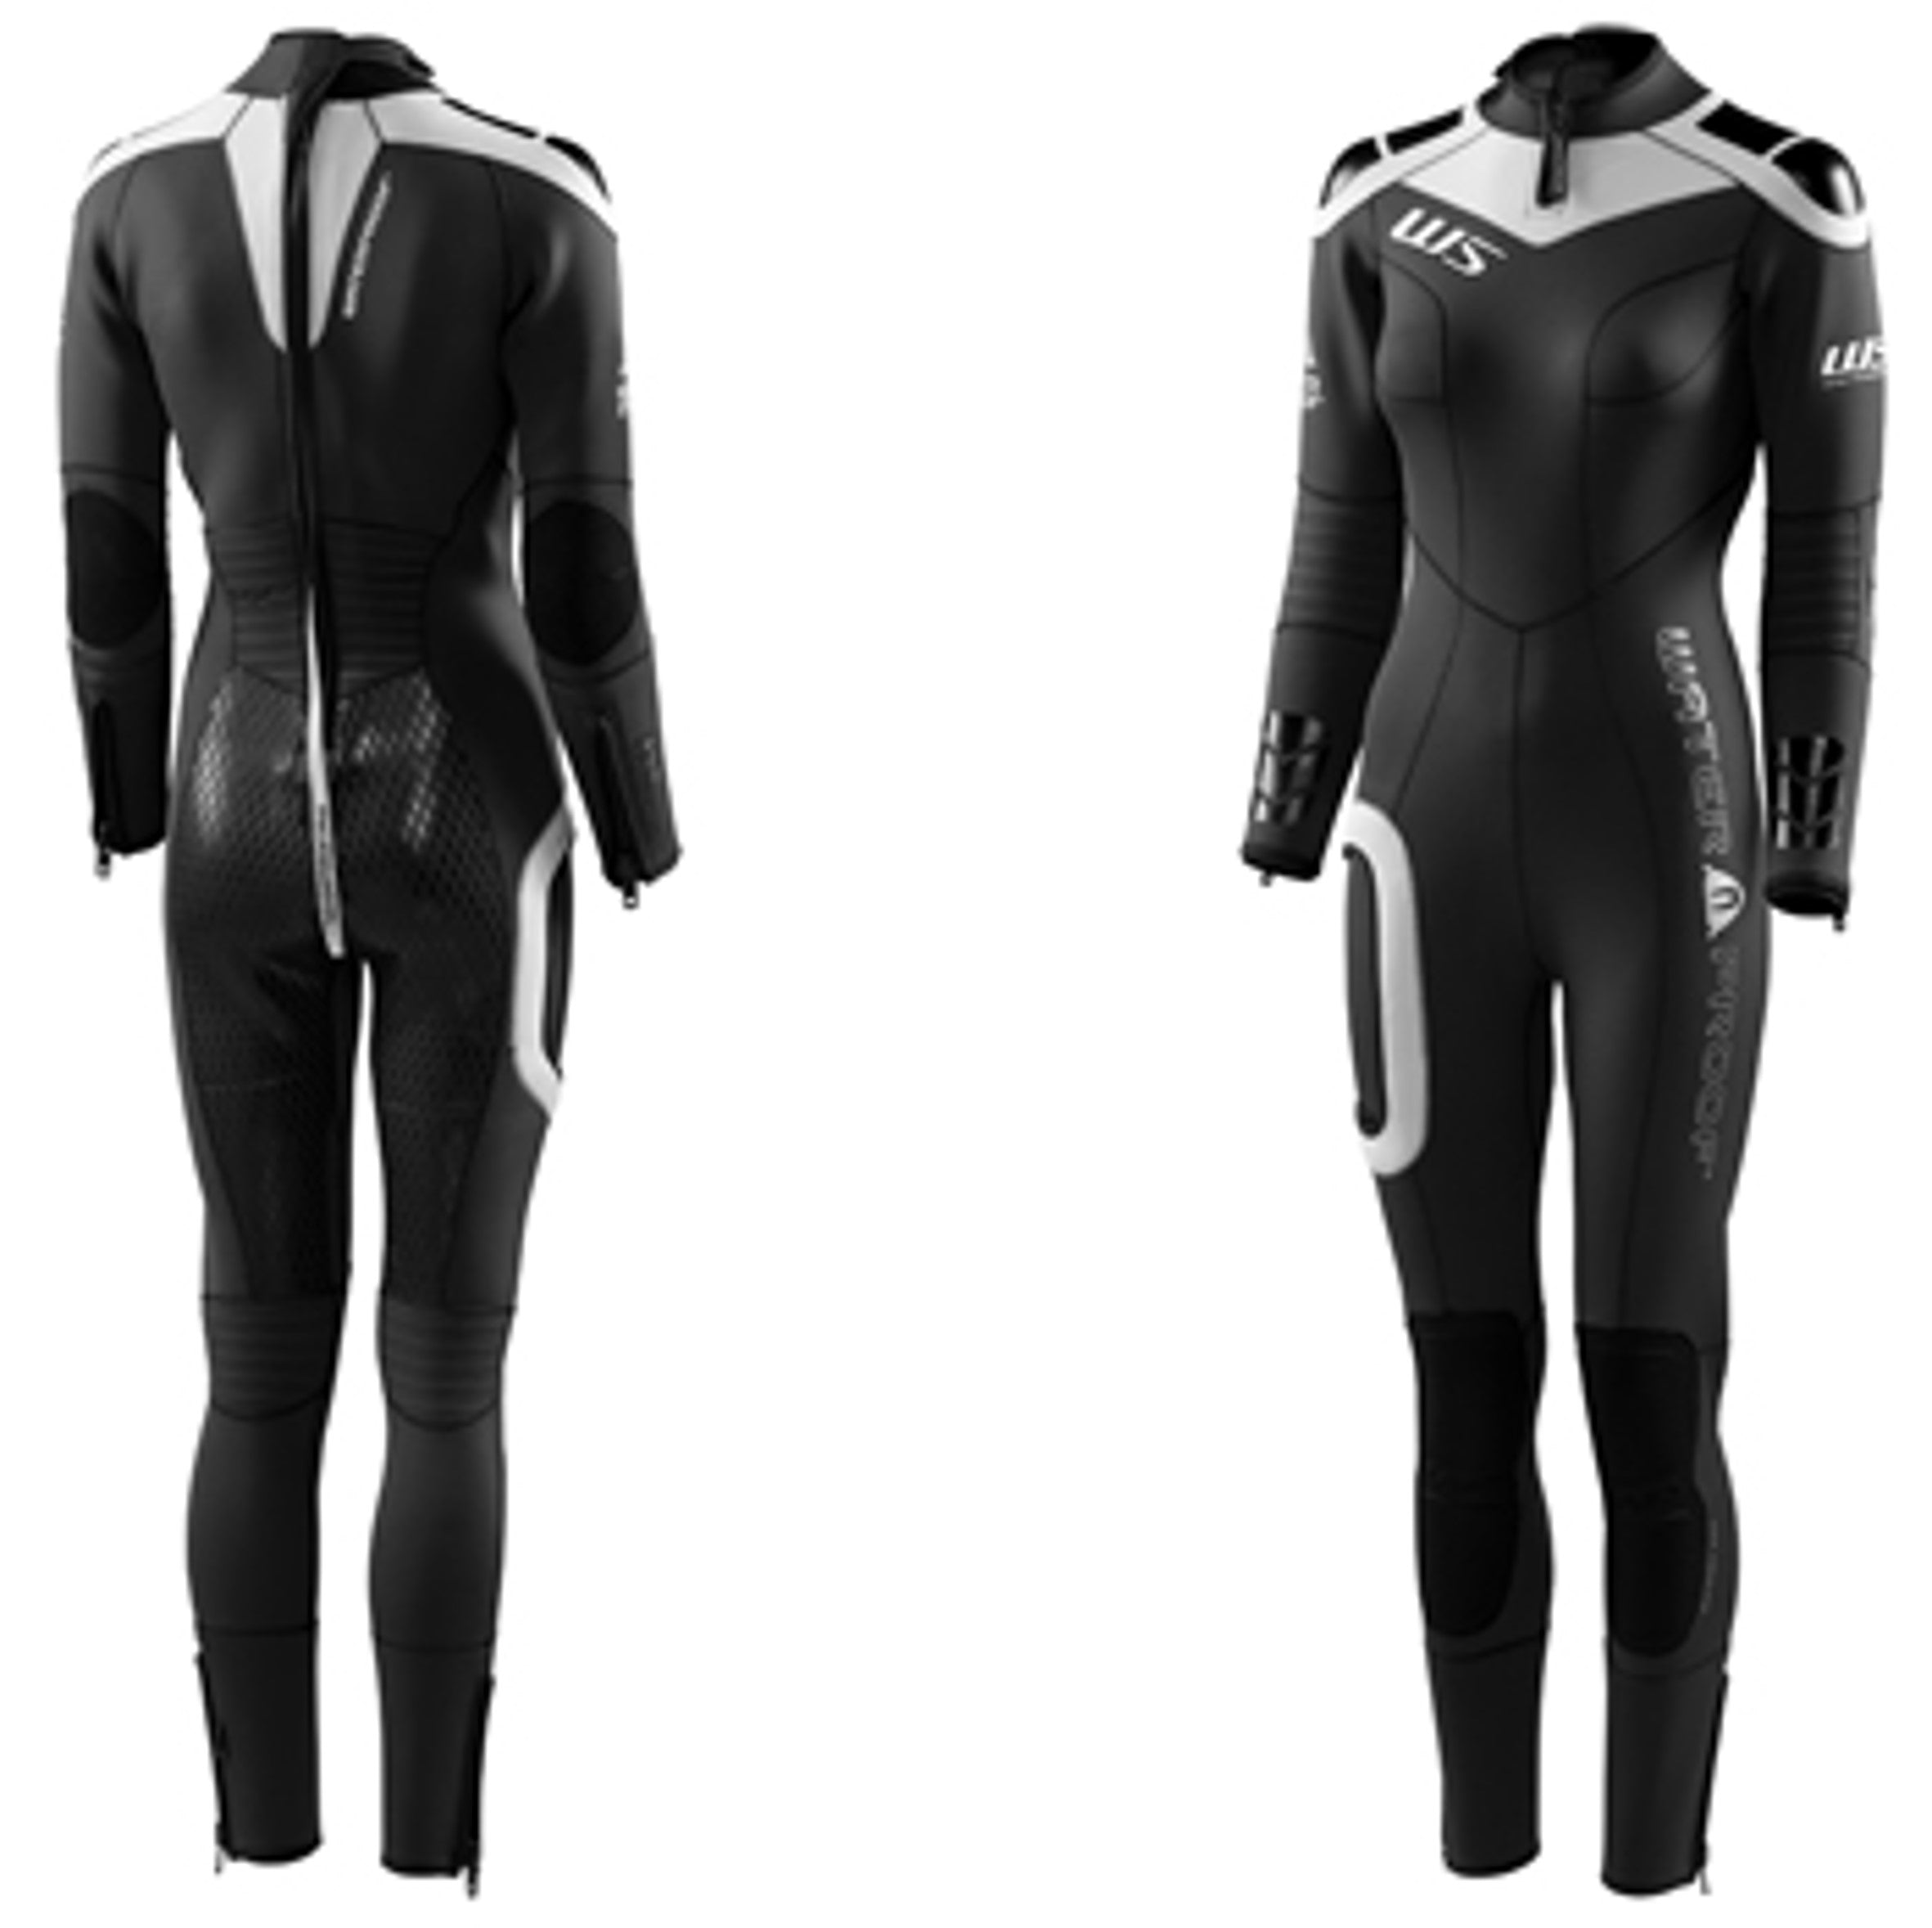 W5 3.5mm Wetsuit - Oyster Diving Equipment